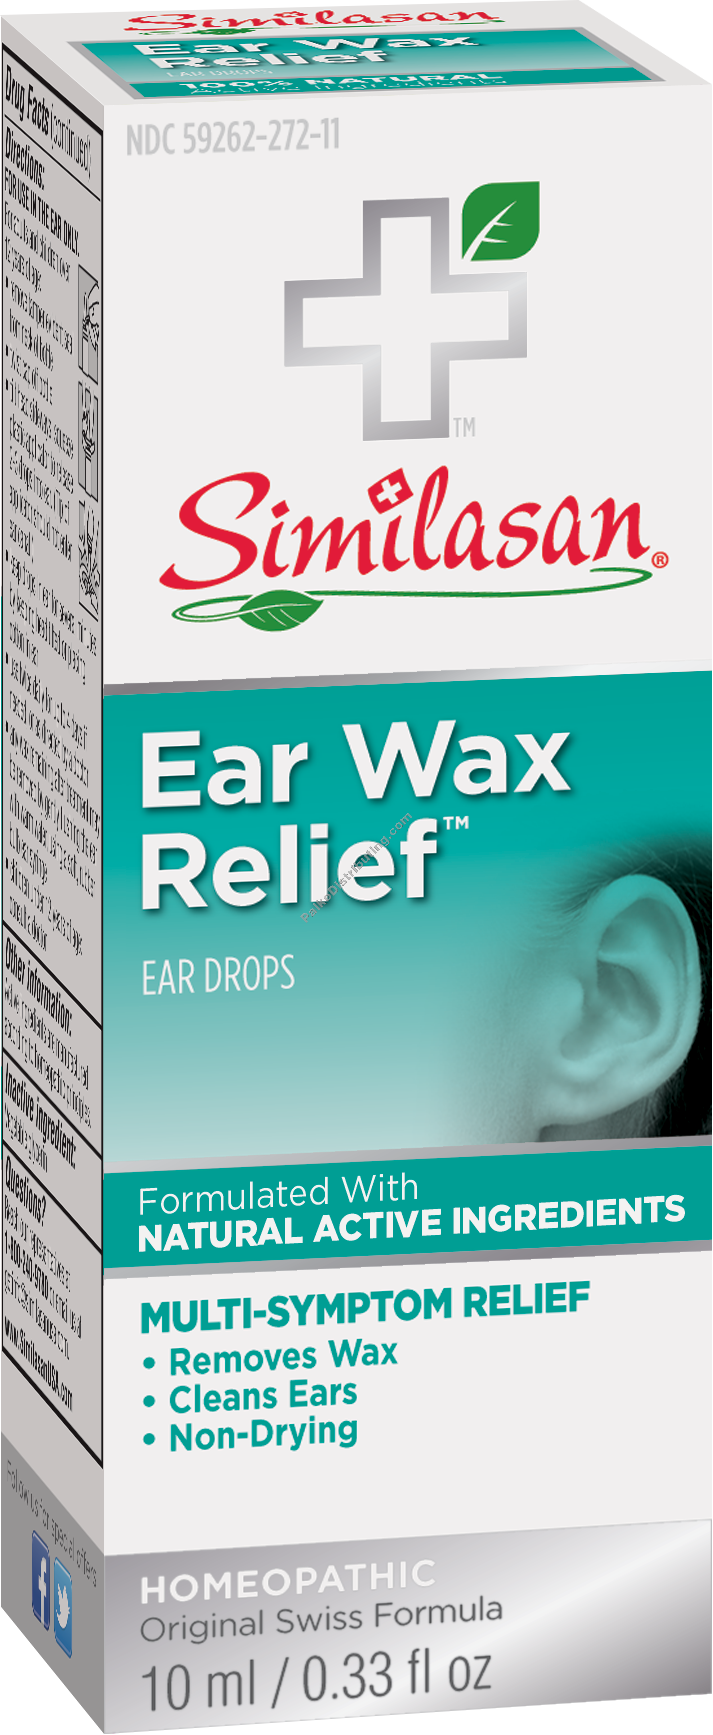 Product Image: Ear Wax Relief Drops 10ml